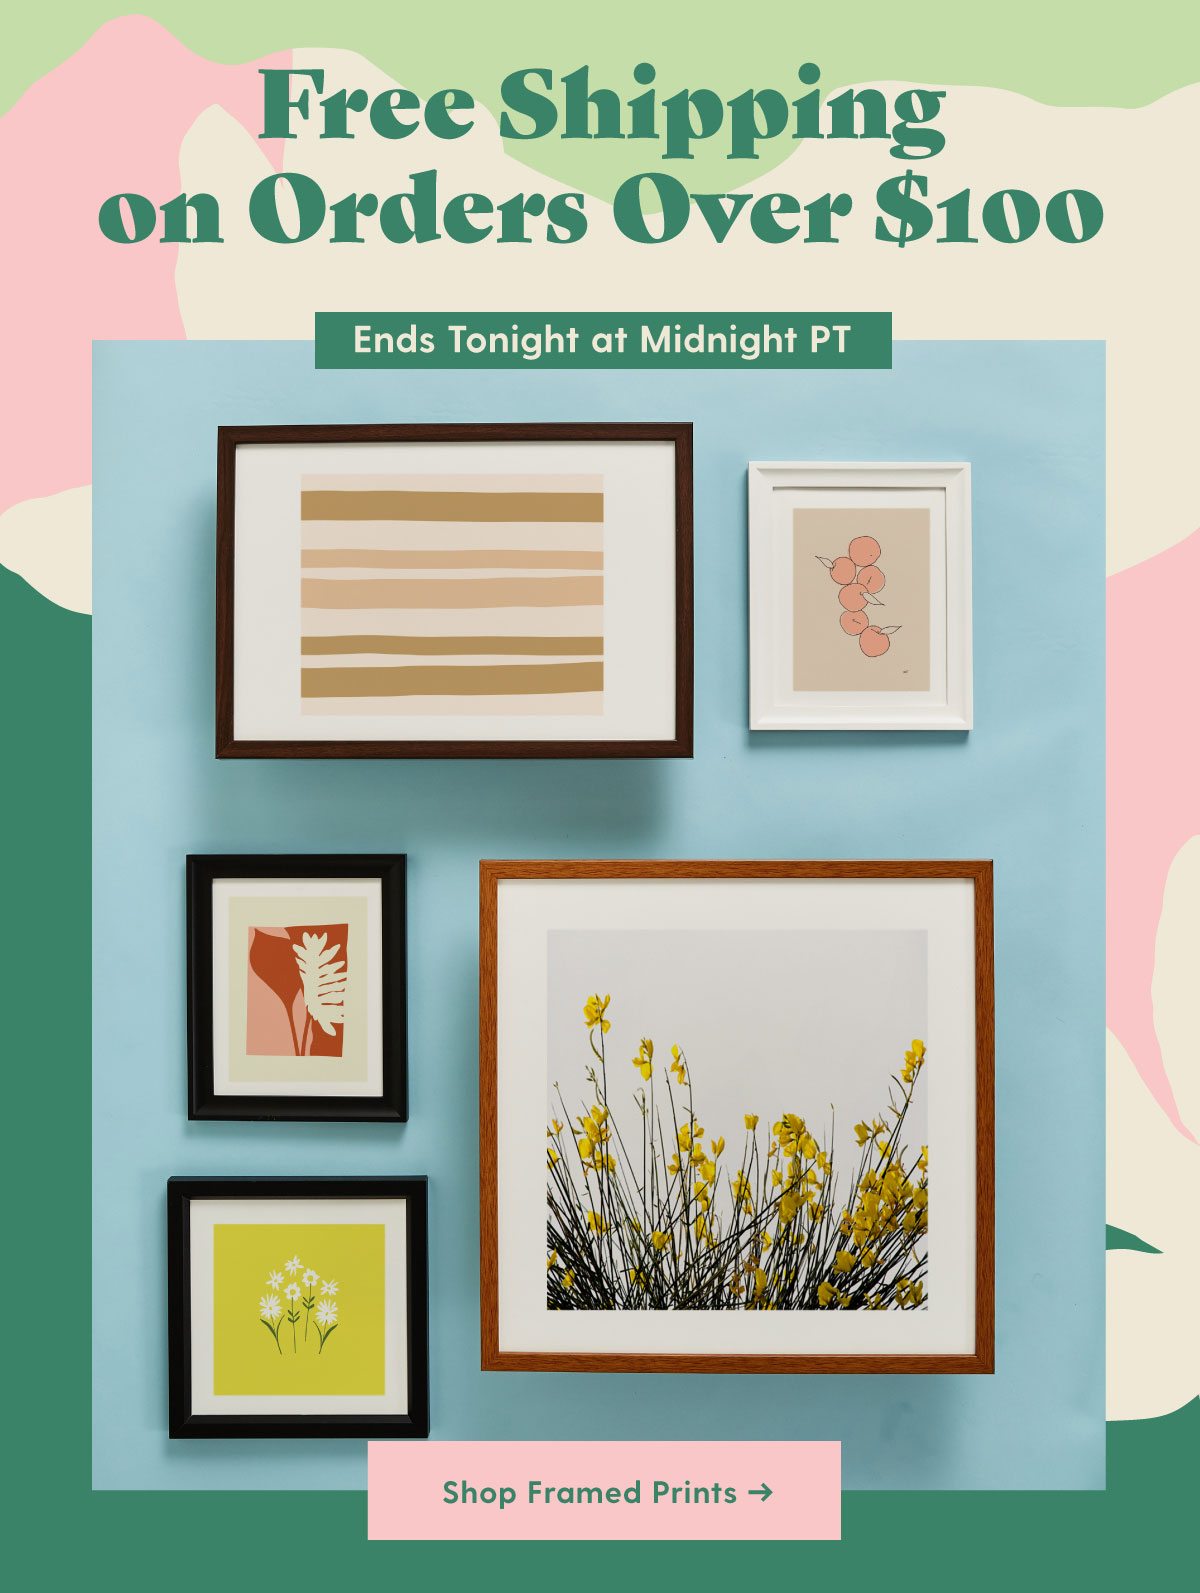  Free Shipping on Orders Over $100 Ends Tonight at Midnight Shop Framed Prints >